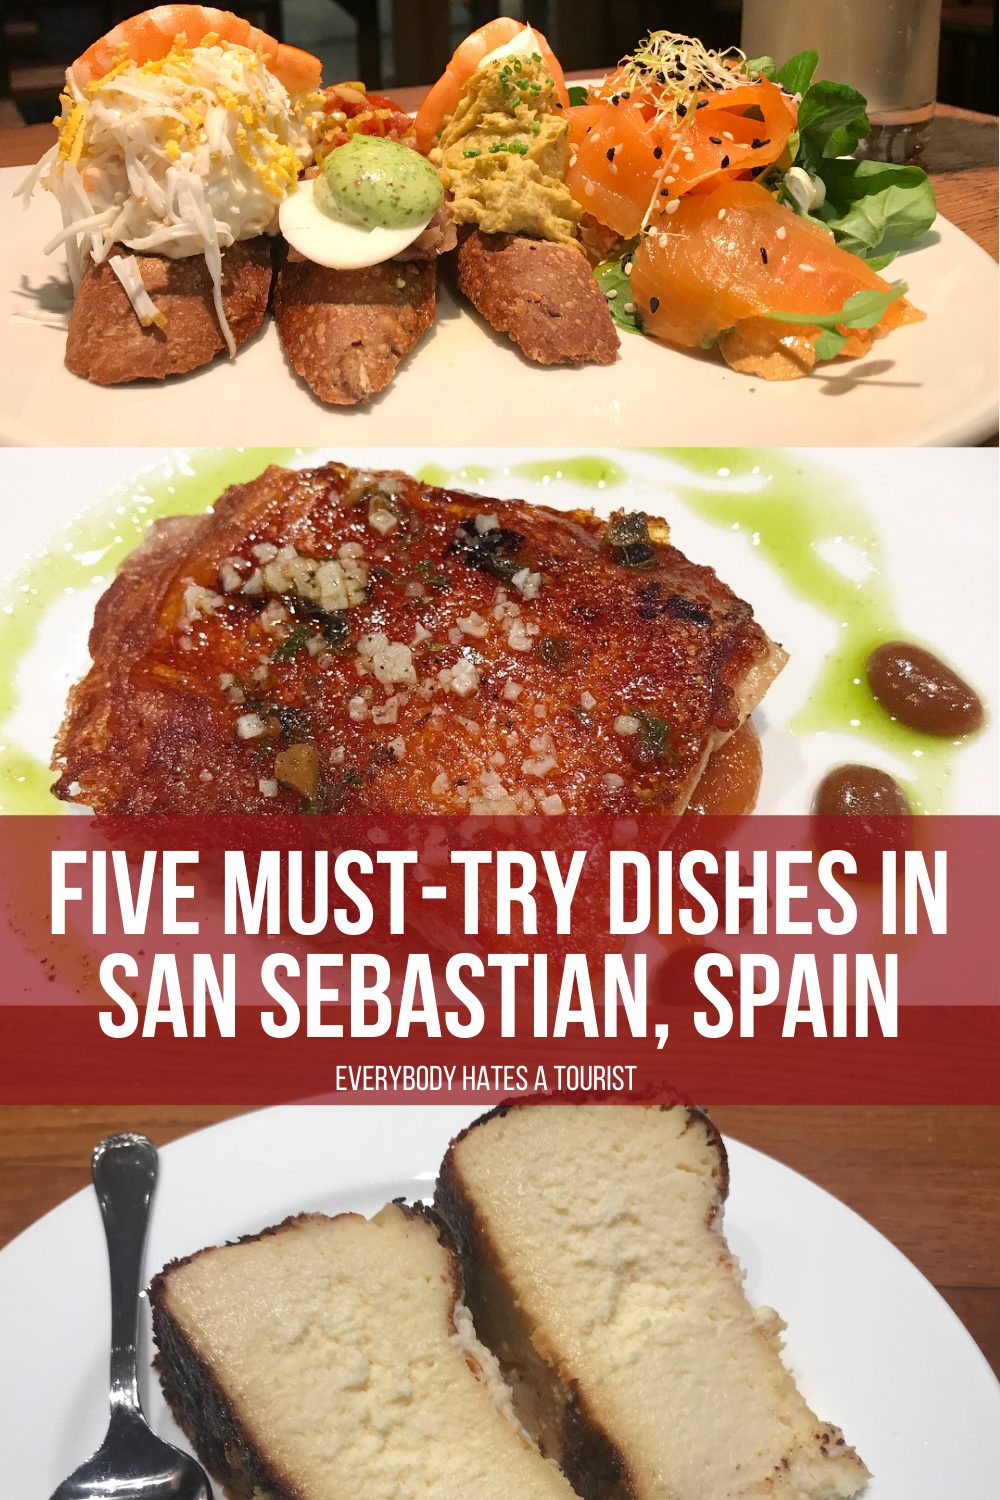 five must try dishes in san sebastian spain - Five must-try dishes in San Sebastian, Spain